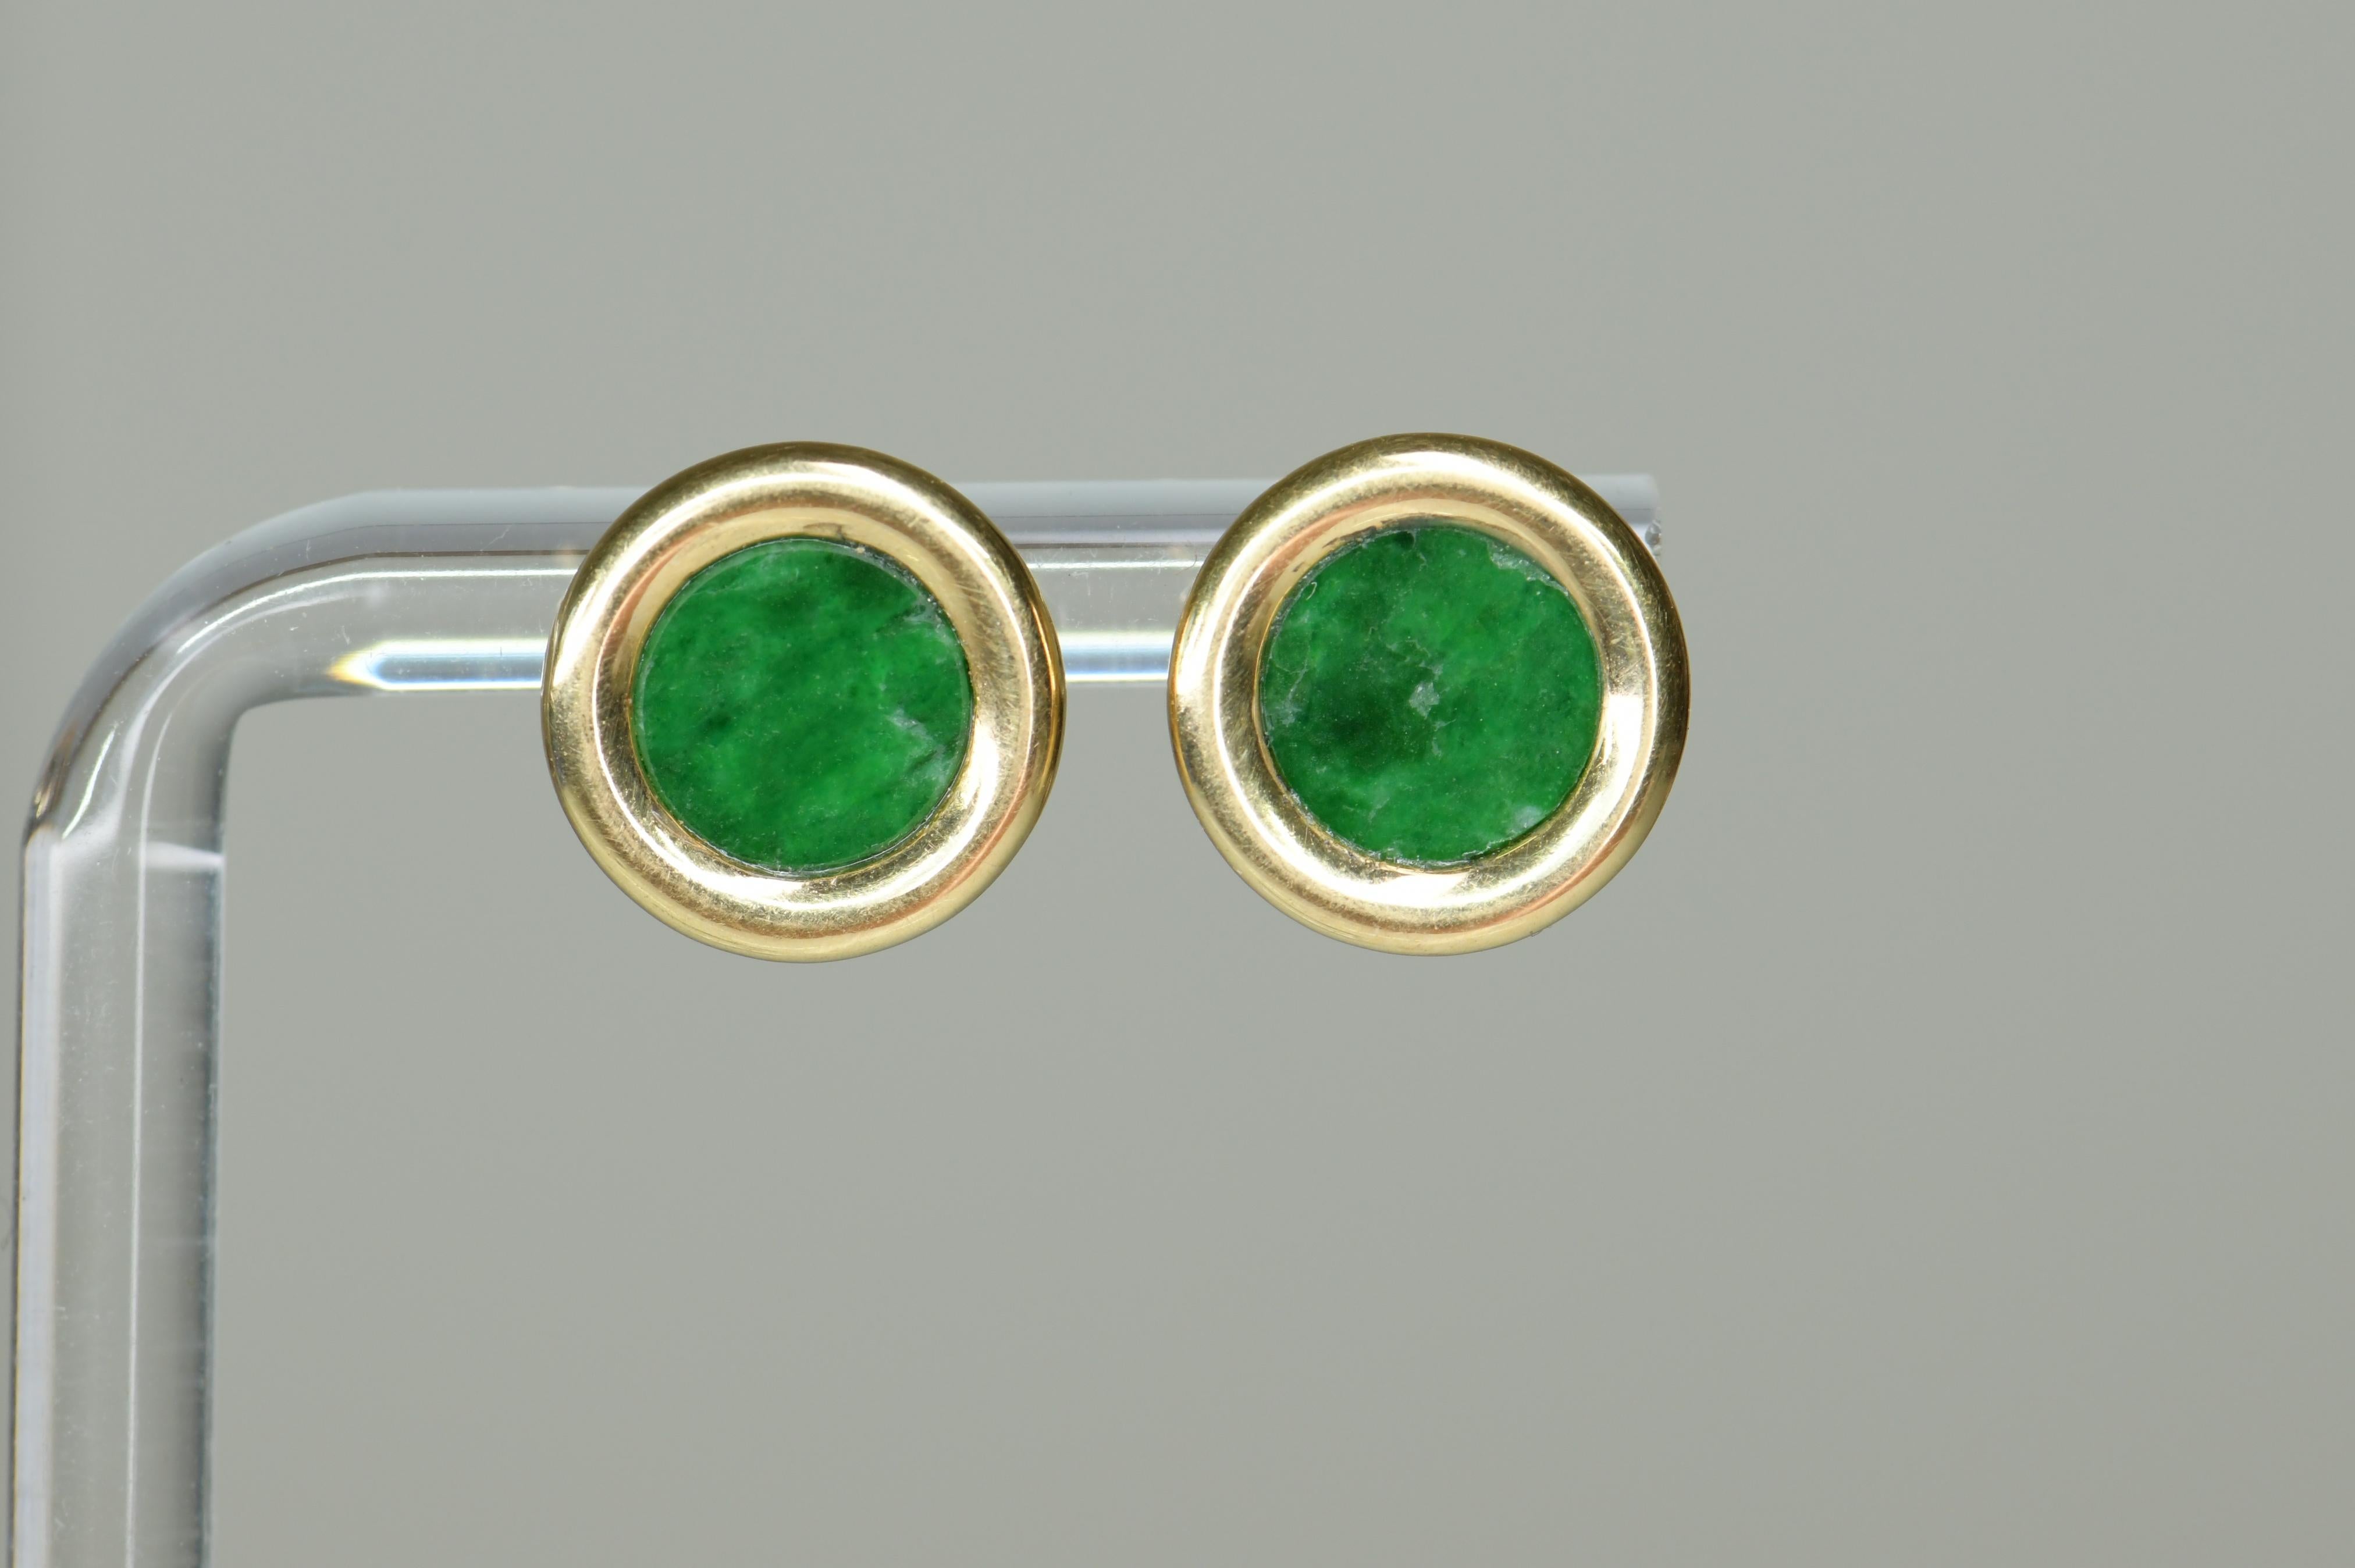 This lovely pair of elegant earrings are crafted from 18k yellow gold, it has a natural no treatment green jadeite.

Diameter: 0.5 inch 
Weight: 5.8g

We have many other fantastic pieces of antique and vintage jewelry listed on our 1stdibs store, so